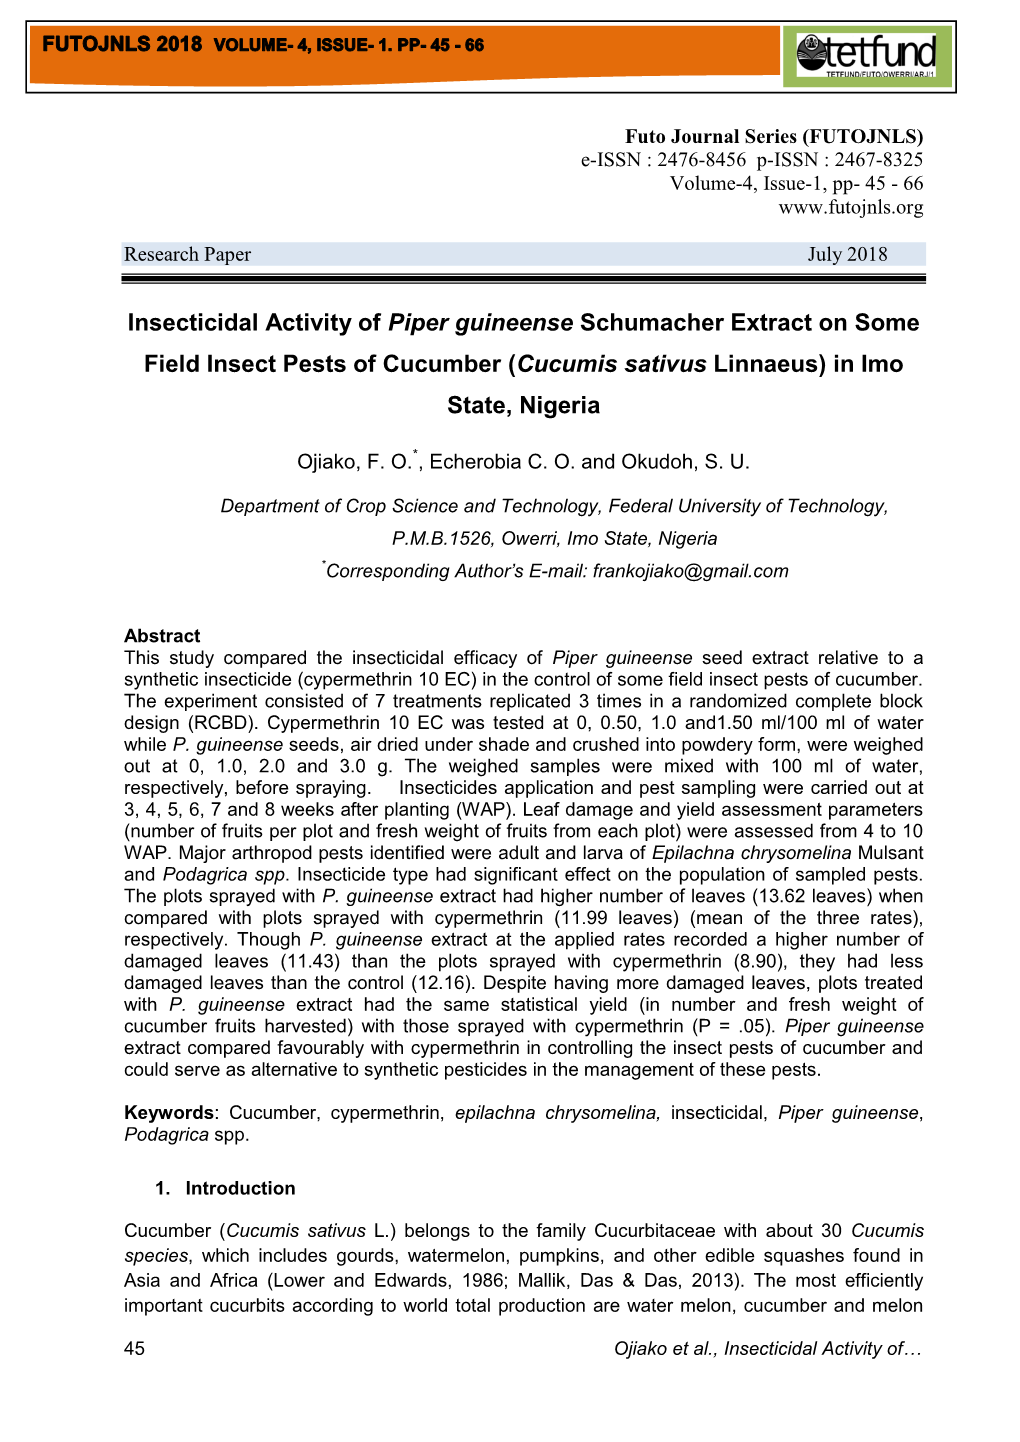 Insecticidal Activity of Piper Guineense Schumacher Extract on Some Field Insect Pests of Cucumber (Cucumis Sativus Linnaeus) in Imo State, Nigeria